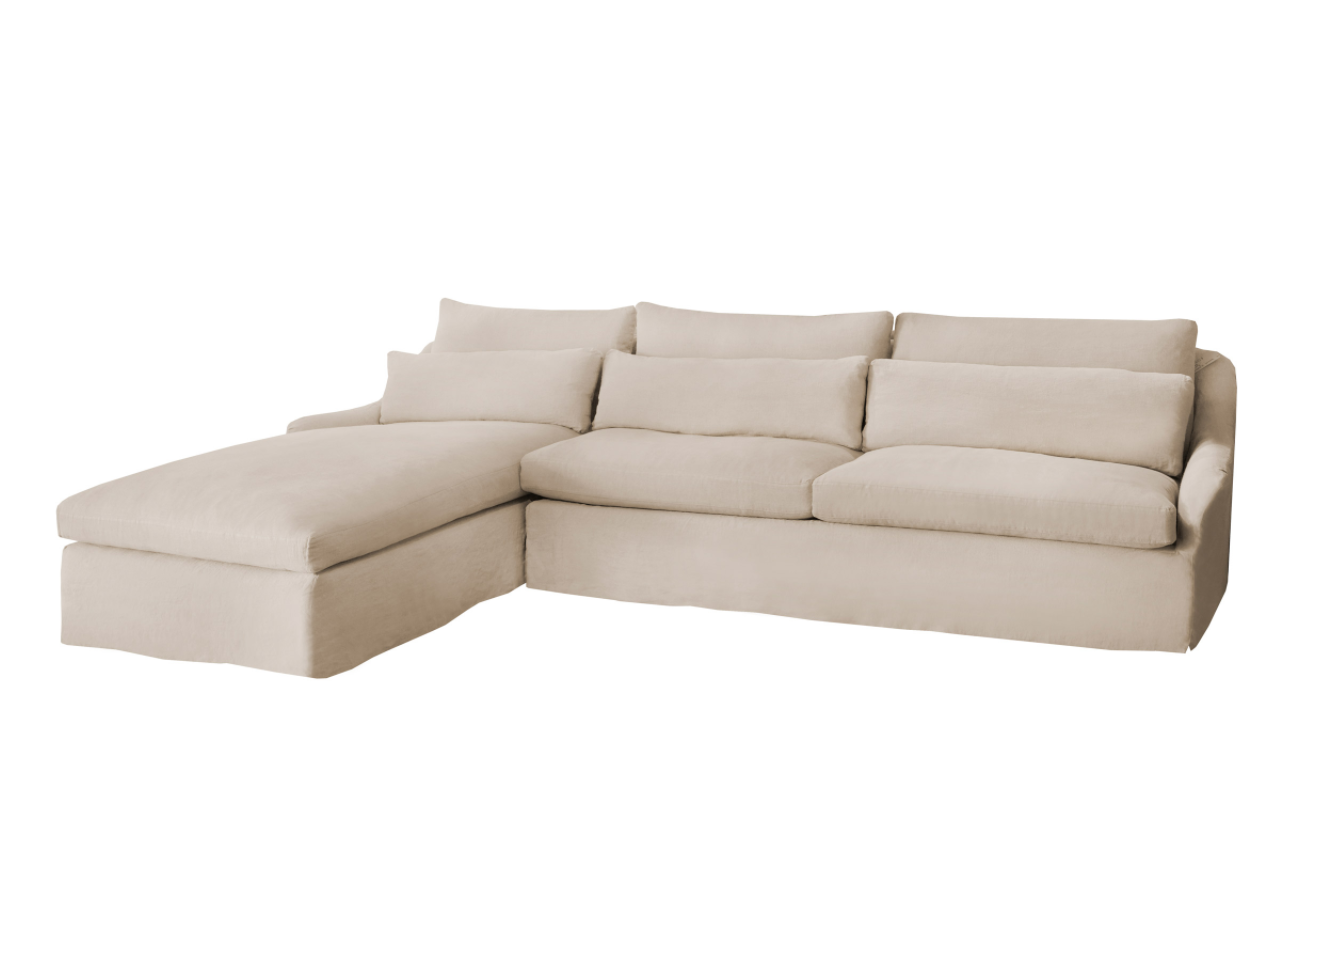  Genevieve LAF Sectional by Cisco Brothers | As shown: Starting at $8,340.00. More options available. 